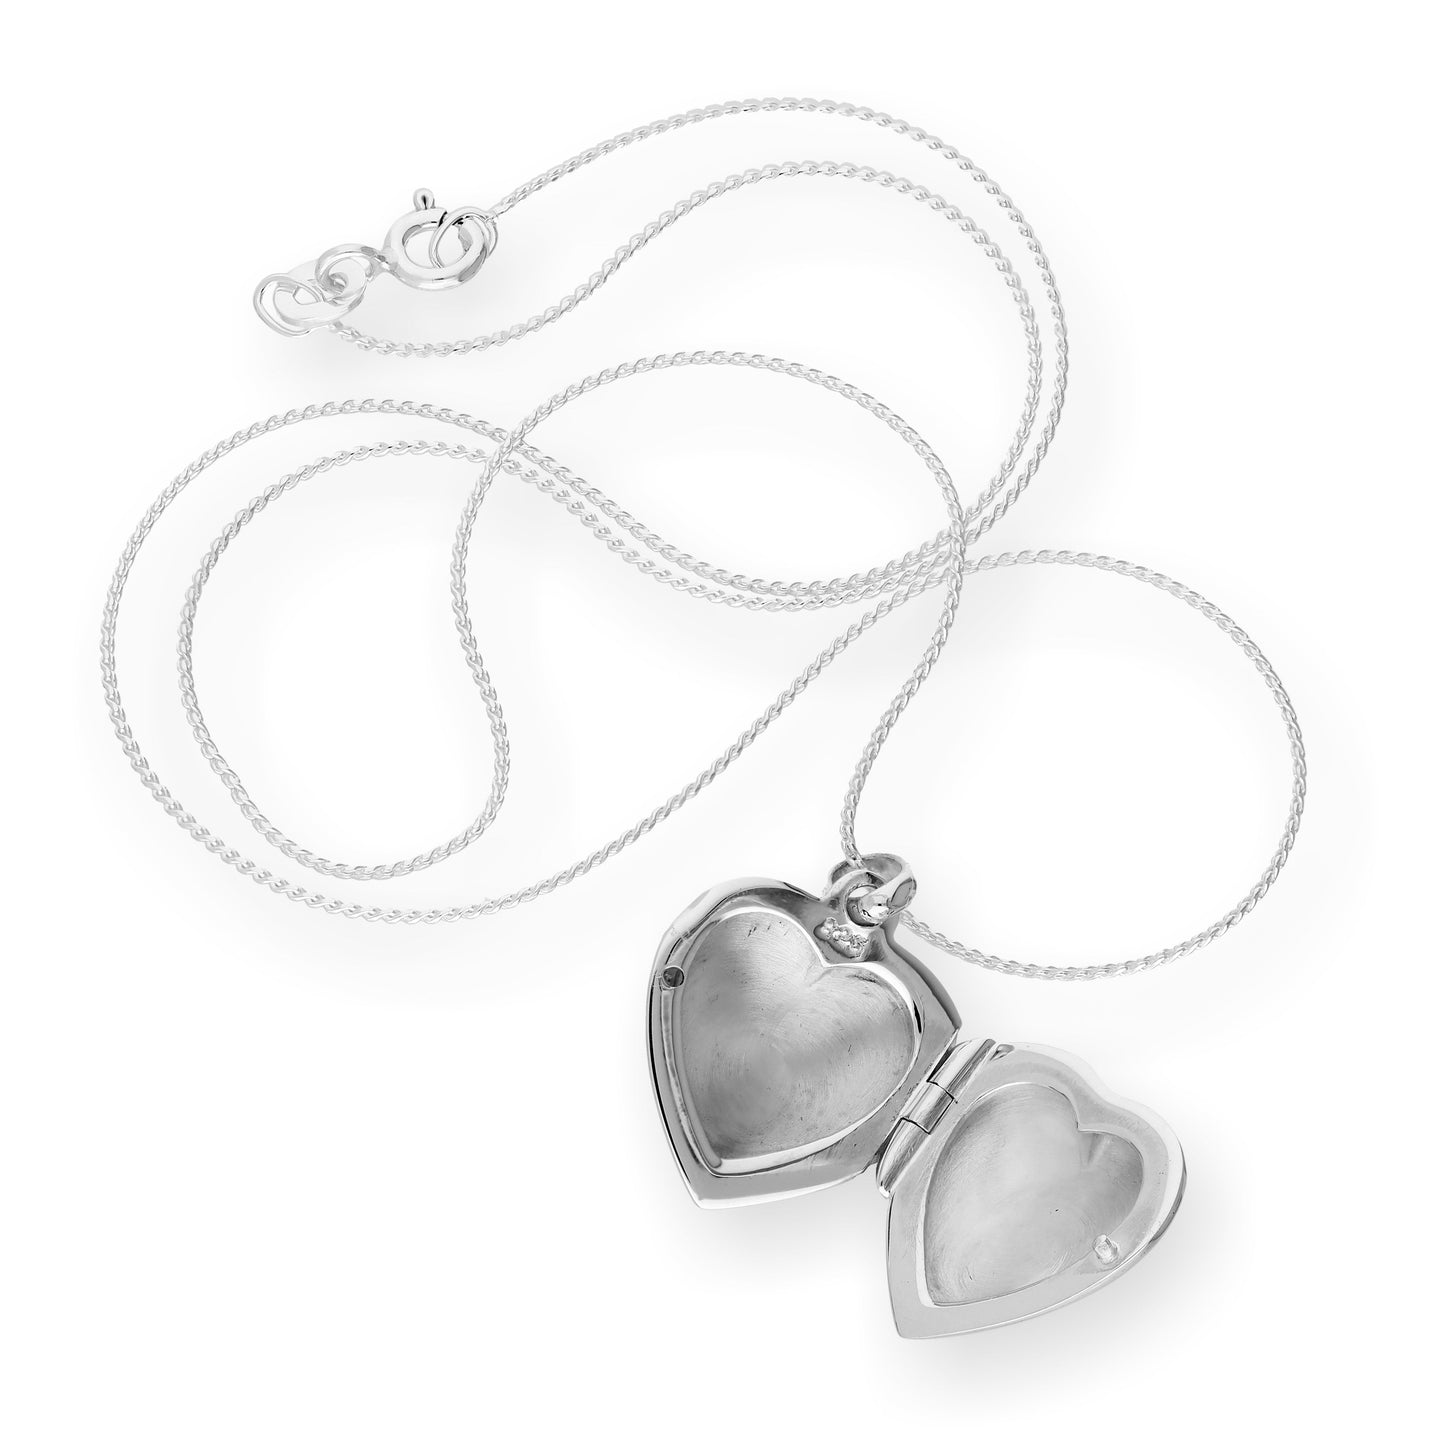 Sterling Silver Engravable Puffed Heart Locket on Chain 16 - 22 Inches